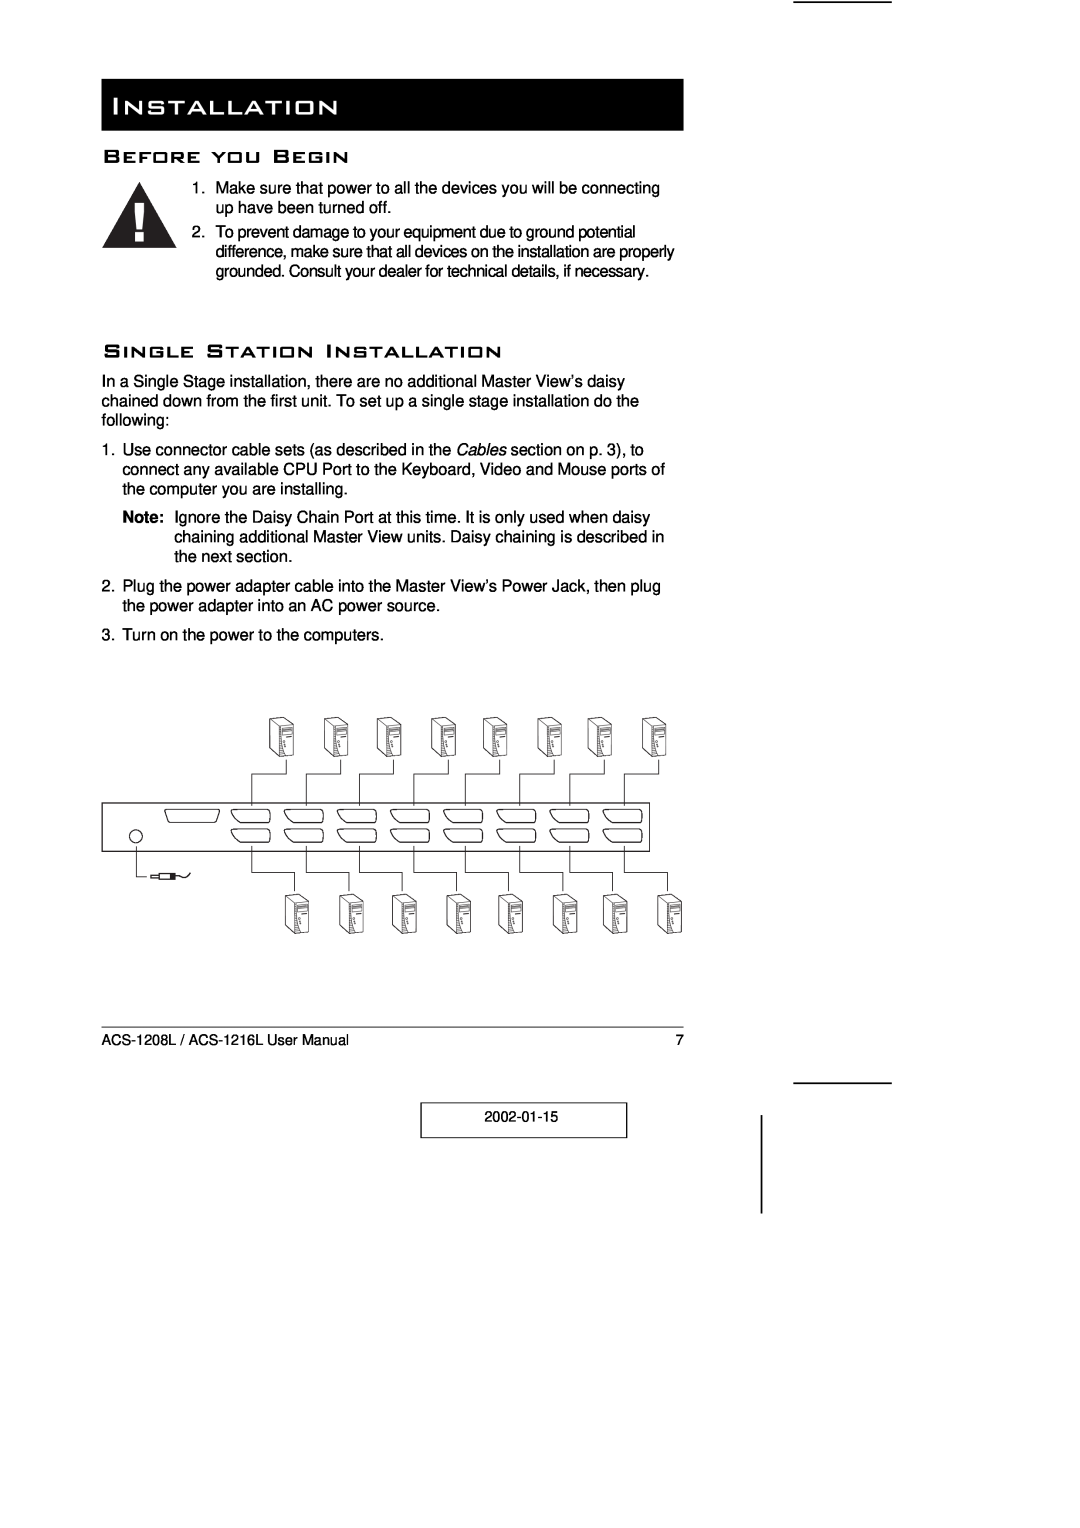 ATEN Technology ACS-1208L user manual Before you Begin, Single Station Installation 